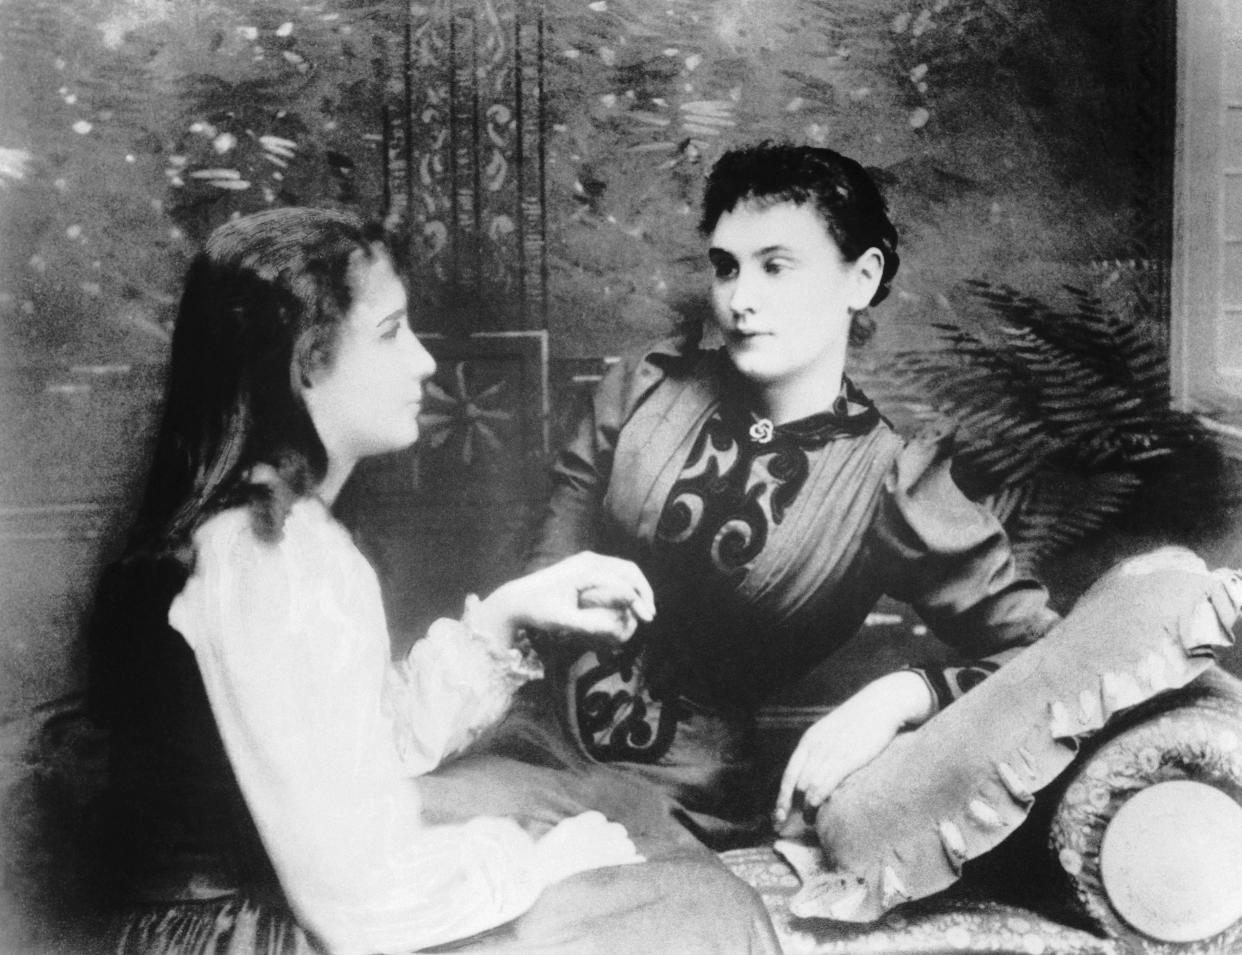 (Original Caption) Born on June 27, 1880, in Tuscumbia, Alabama, Helen Keller was stricken nineteen months later by a strange disease that left her both blind and deaf. She began a life of loneliness in the sudden silence and blackness of a strange world. On March 3, 1887, a twenty-one-year-old girl, Anne Sullivan, daughter of Irish immigrants, who had been half-blind herself as a child, arrived at the Keller's household. 